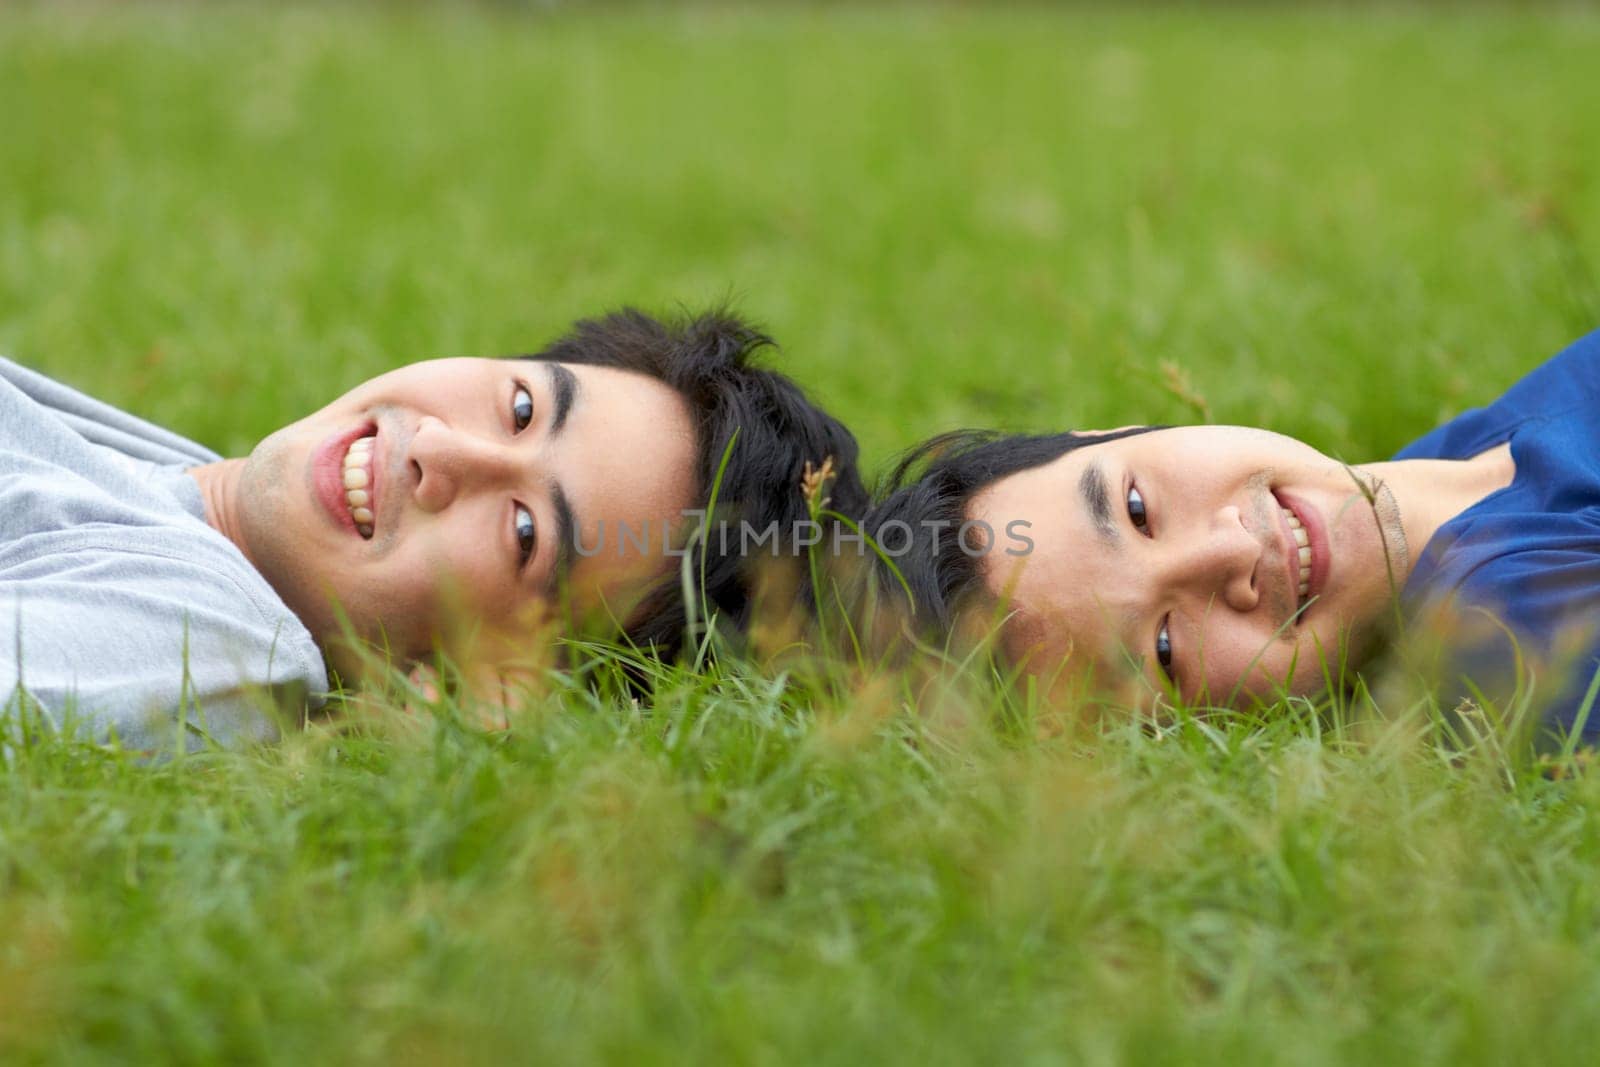 Happy, relax and portrait of a gay couple in the grass for love, bonding and happiness in a park. Smile, lgbtq and Asian men in nature for a date, romance and relaxing together on a lawn or field by YuriArcurs